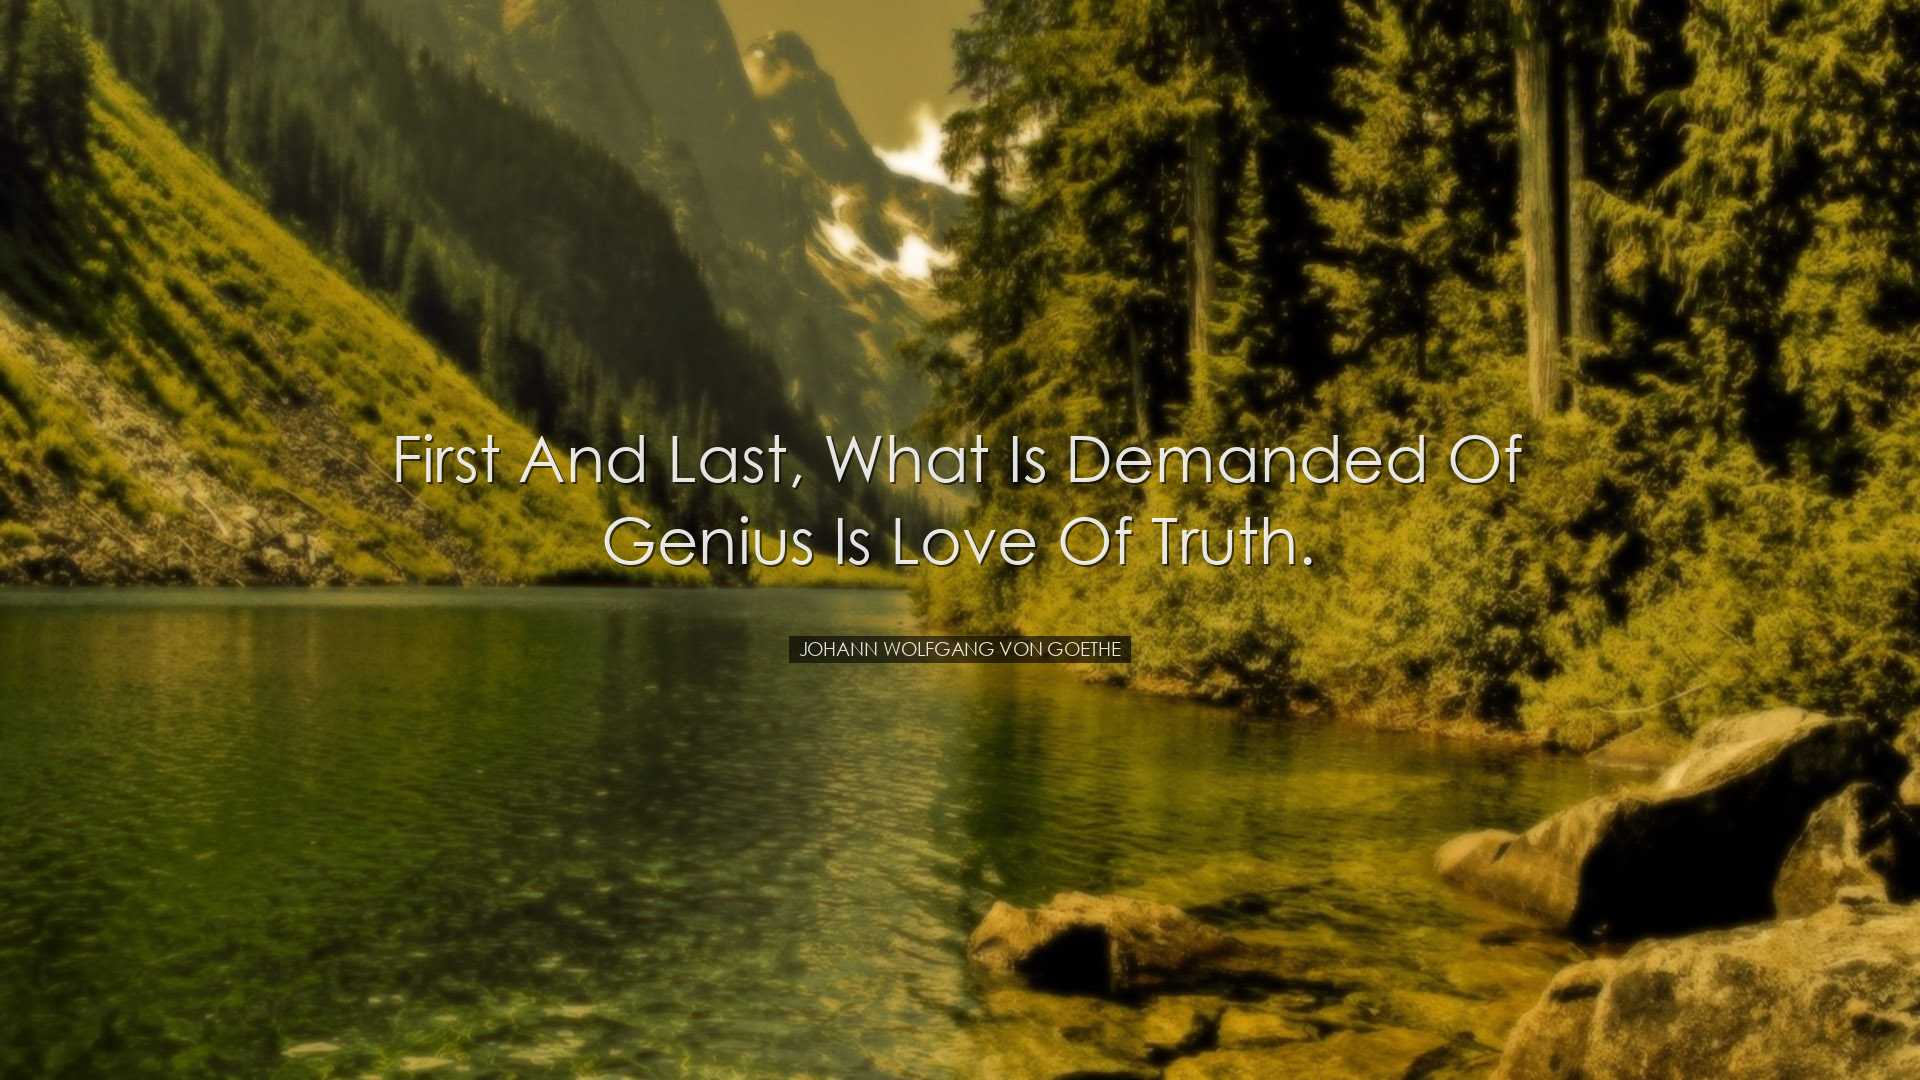 First and last, what is demanded of genius is love of truth. - Joh